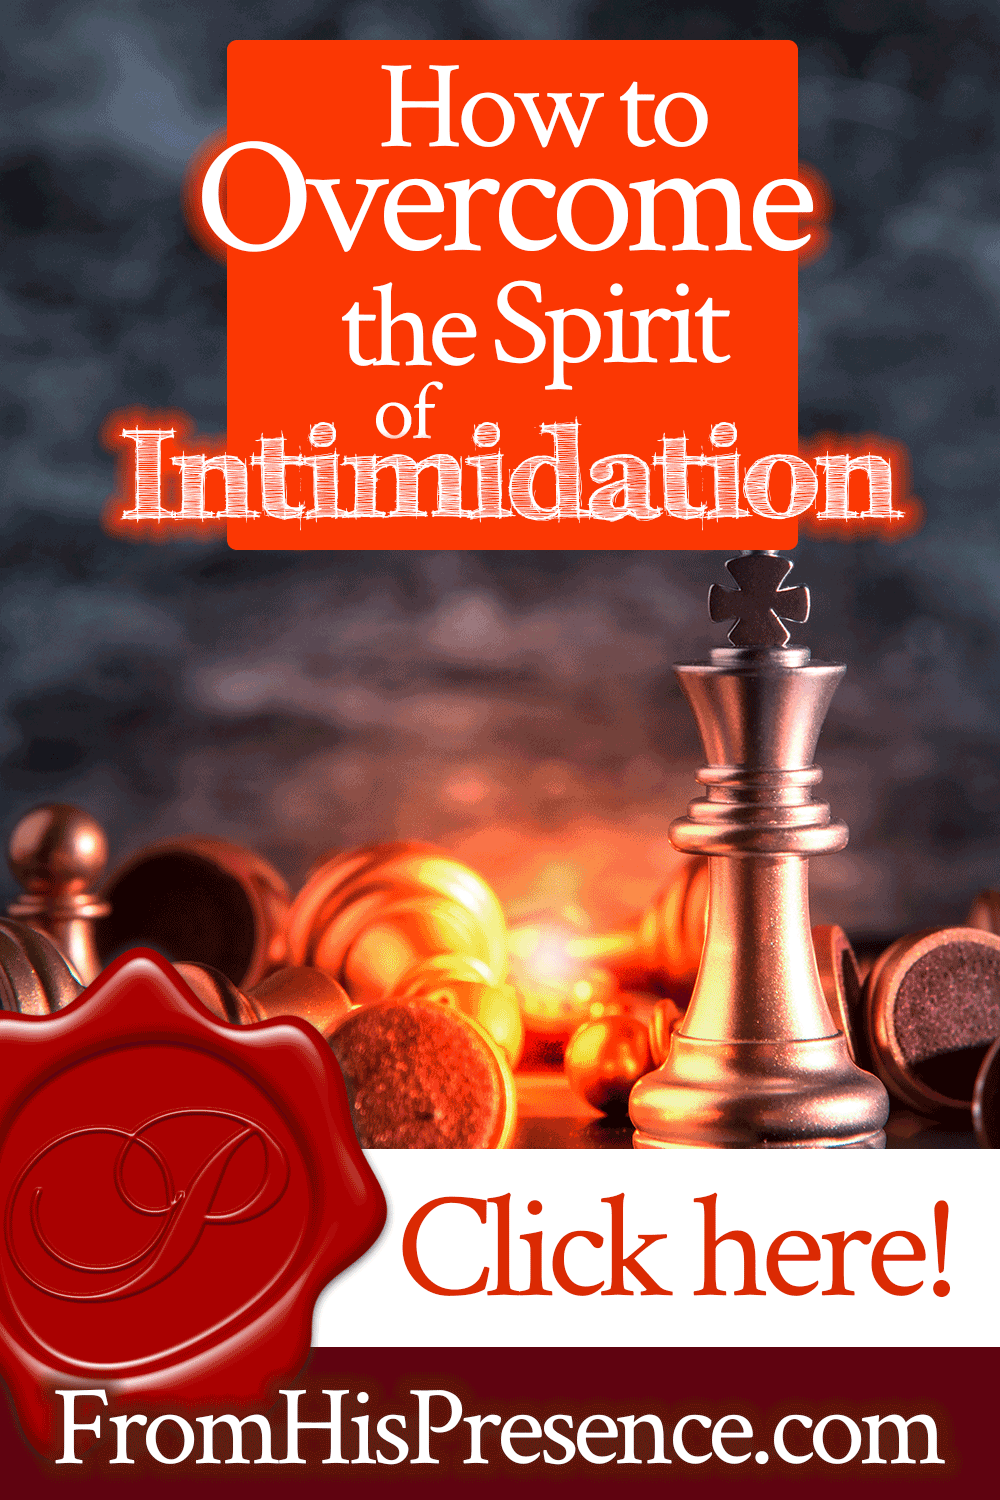 How to Overcome the Spirit of Intimidation | Prophetic word by Jamie Rohrbaugh | FromHisPresence.com